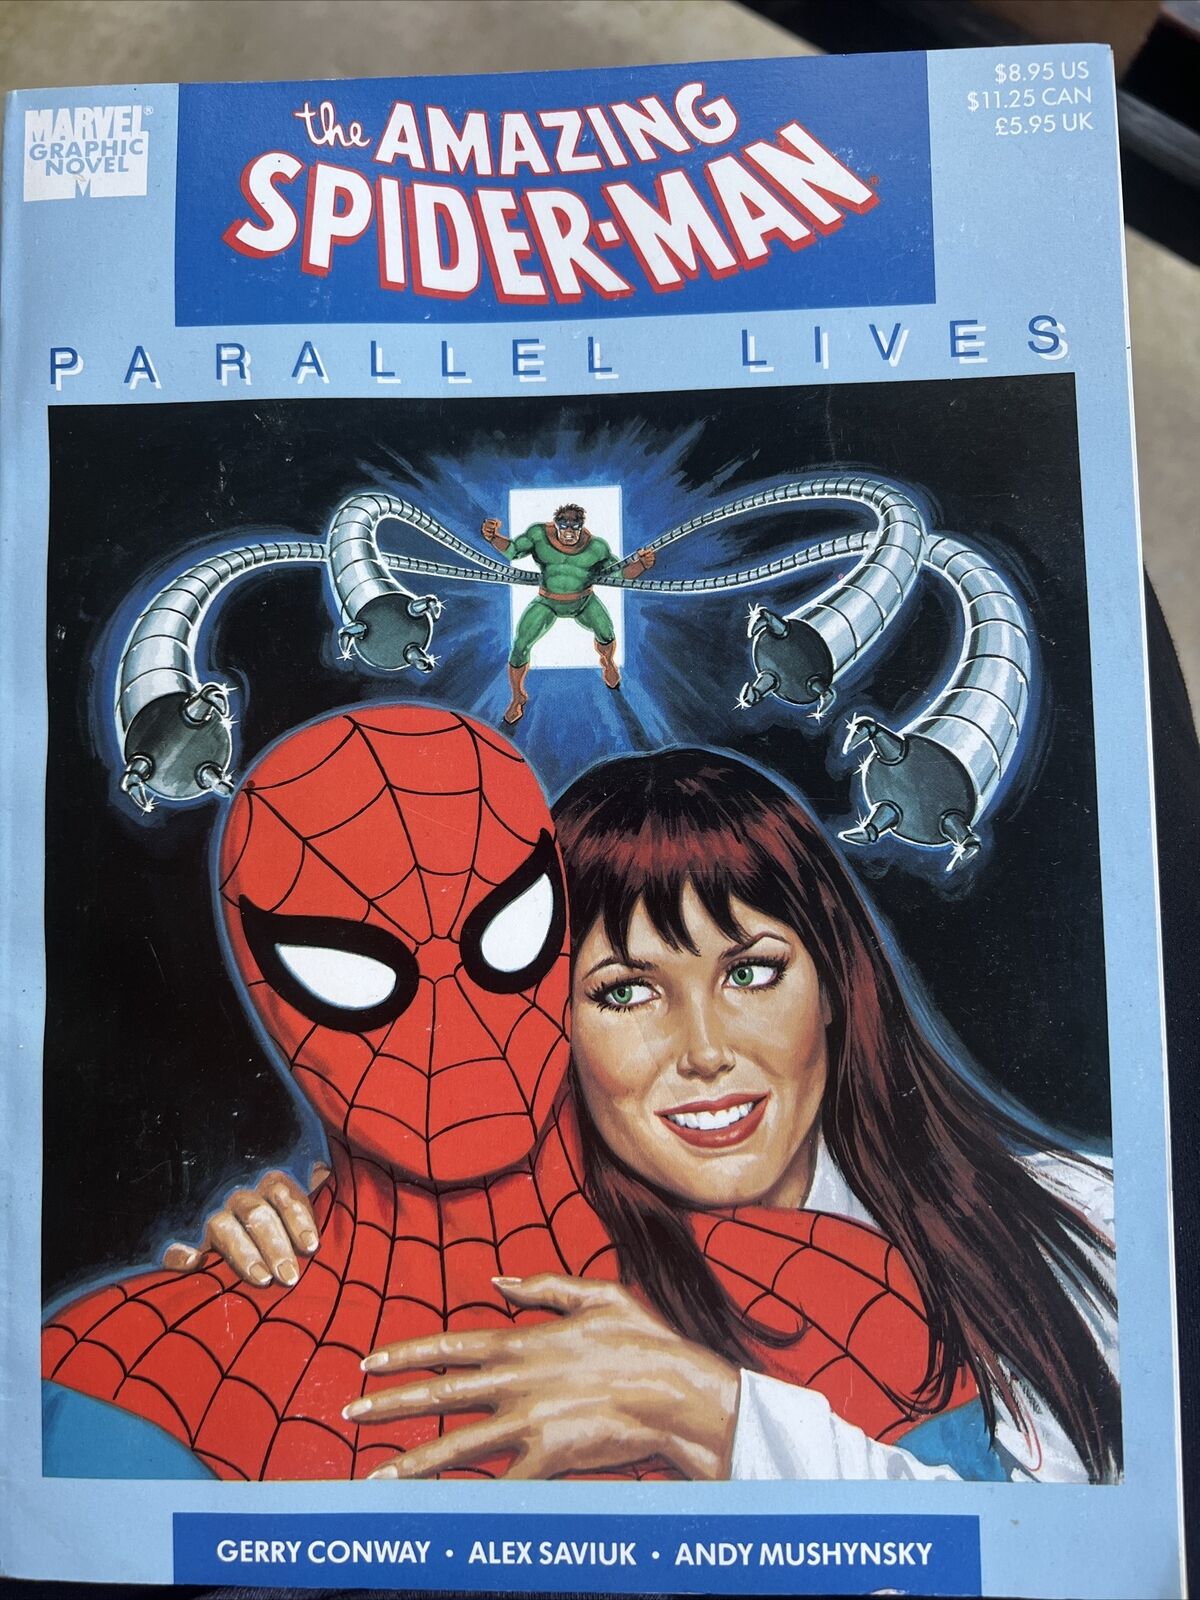 The Amazing Spider-Man Parallel Lives First Edition Signed By Gerry Conway